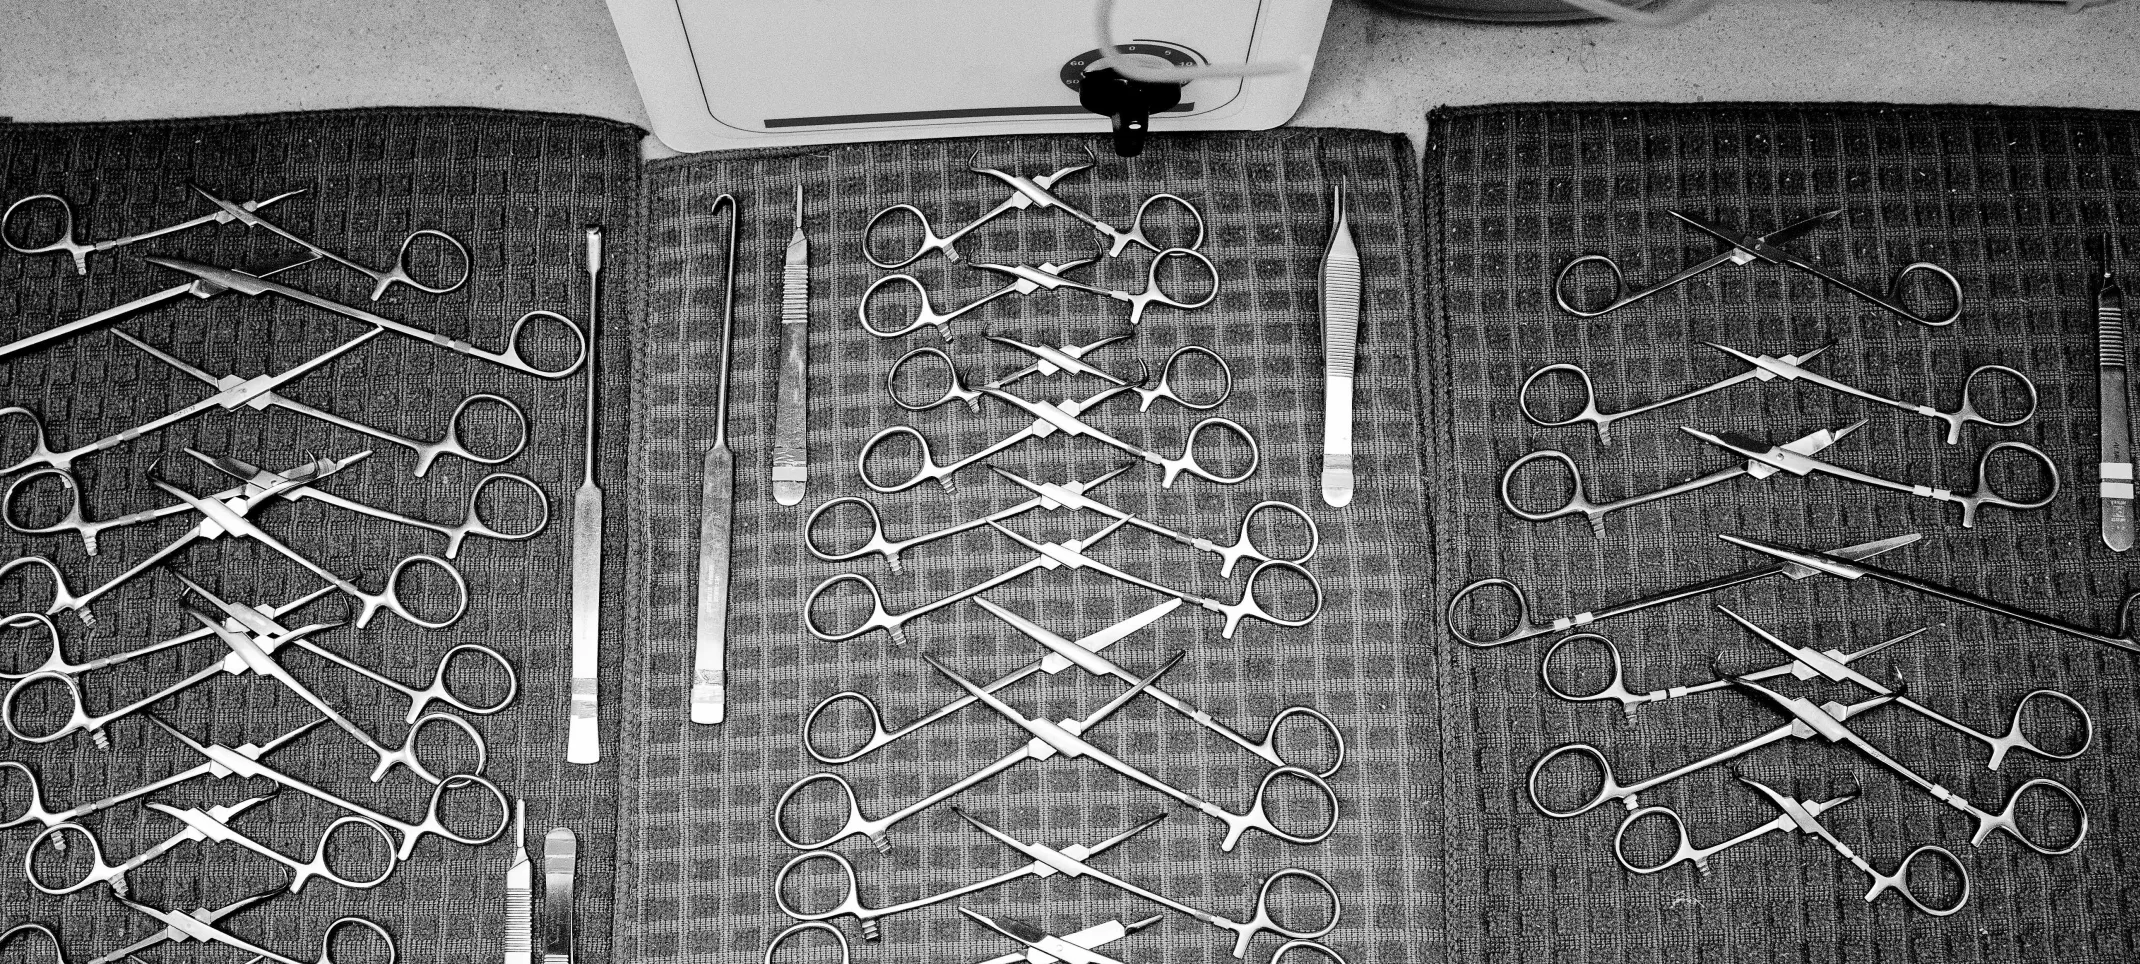 Black and white photo of surgery equipment